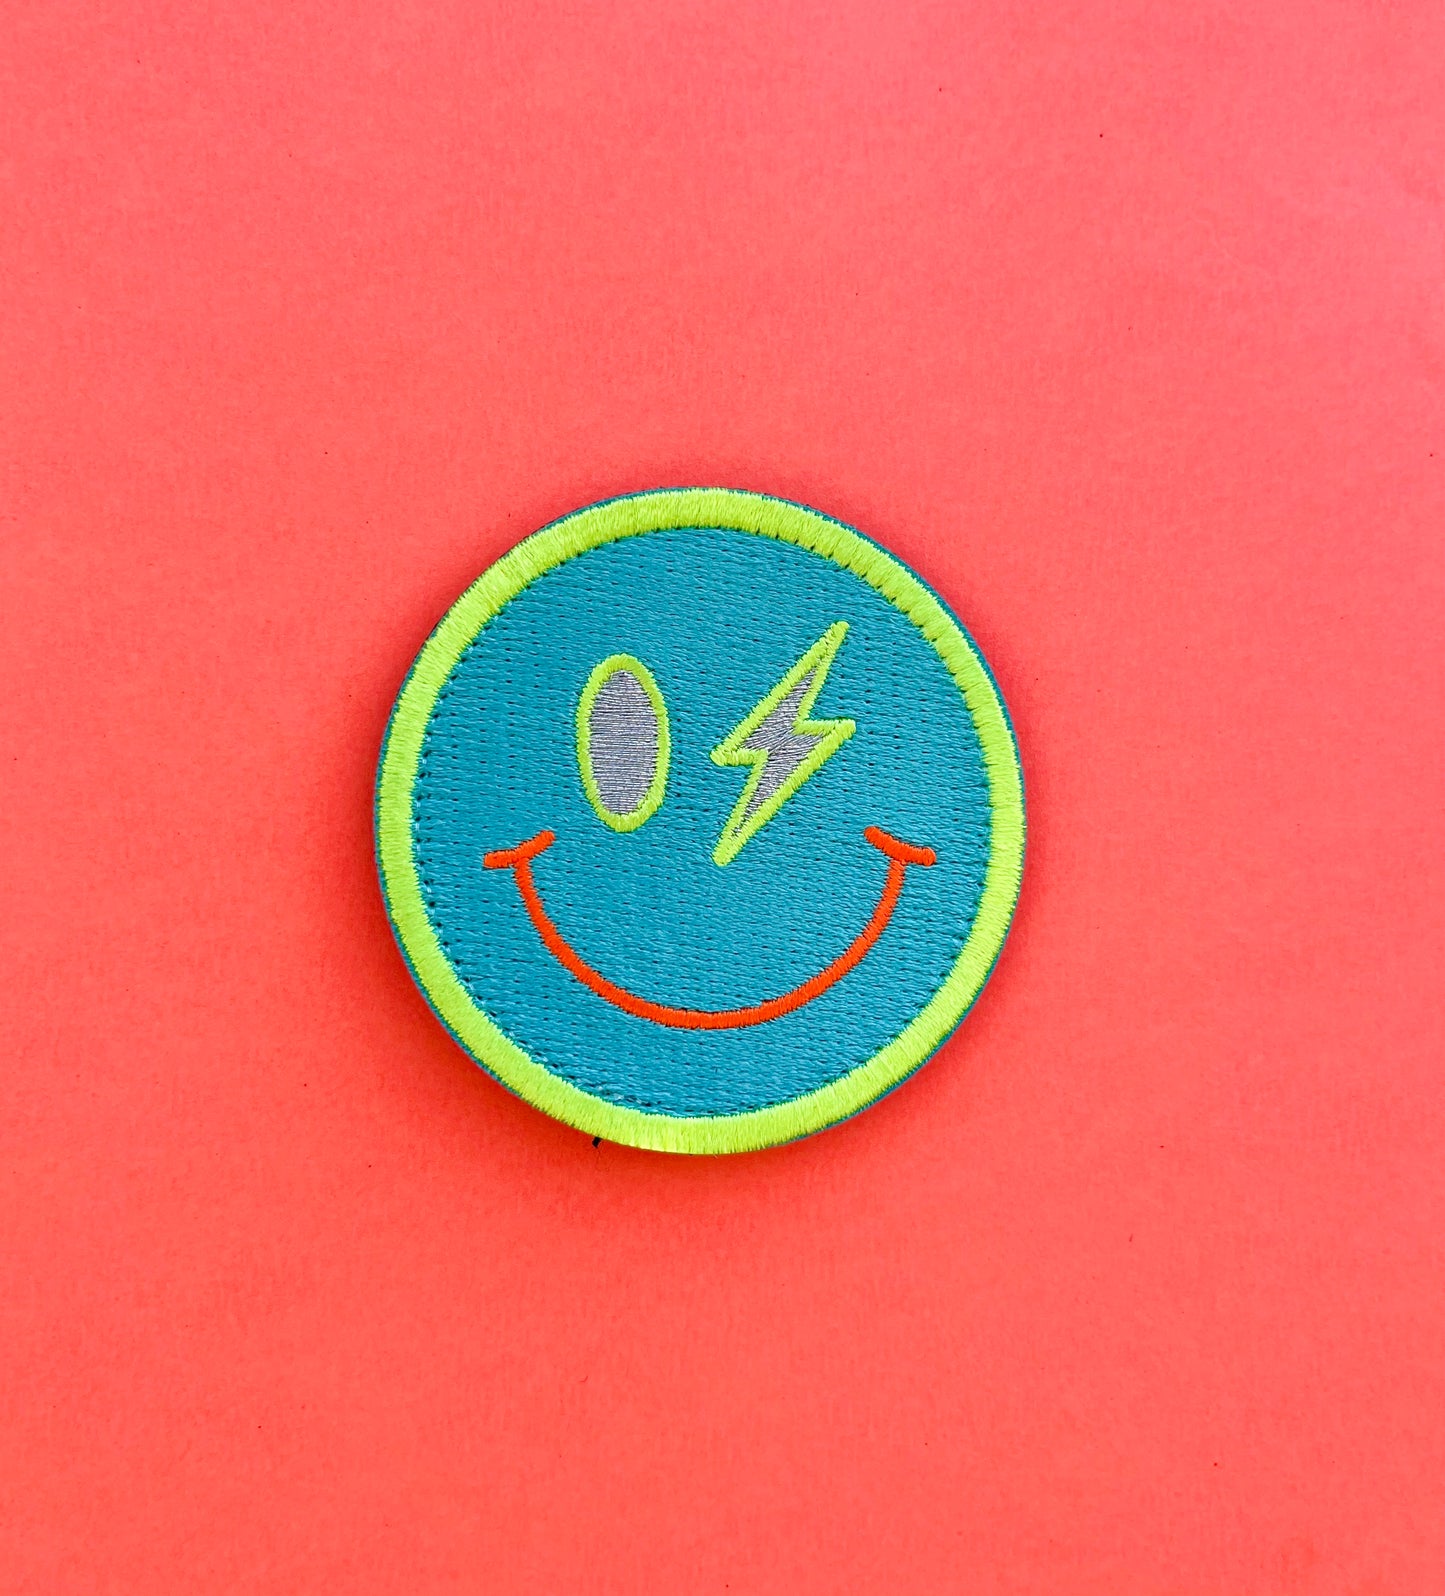 AUFNÄHER / PATCH "ELECTRIC SMILEY"